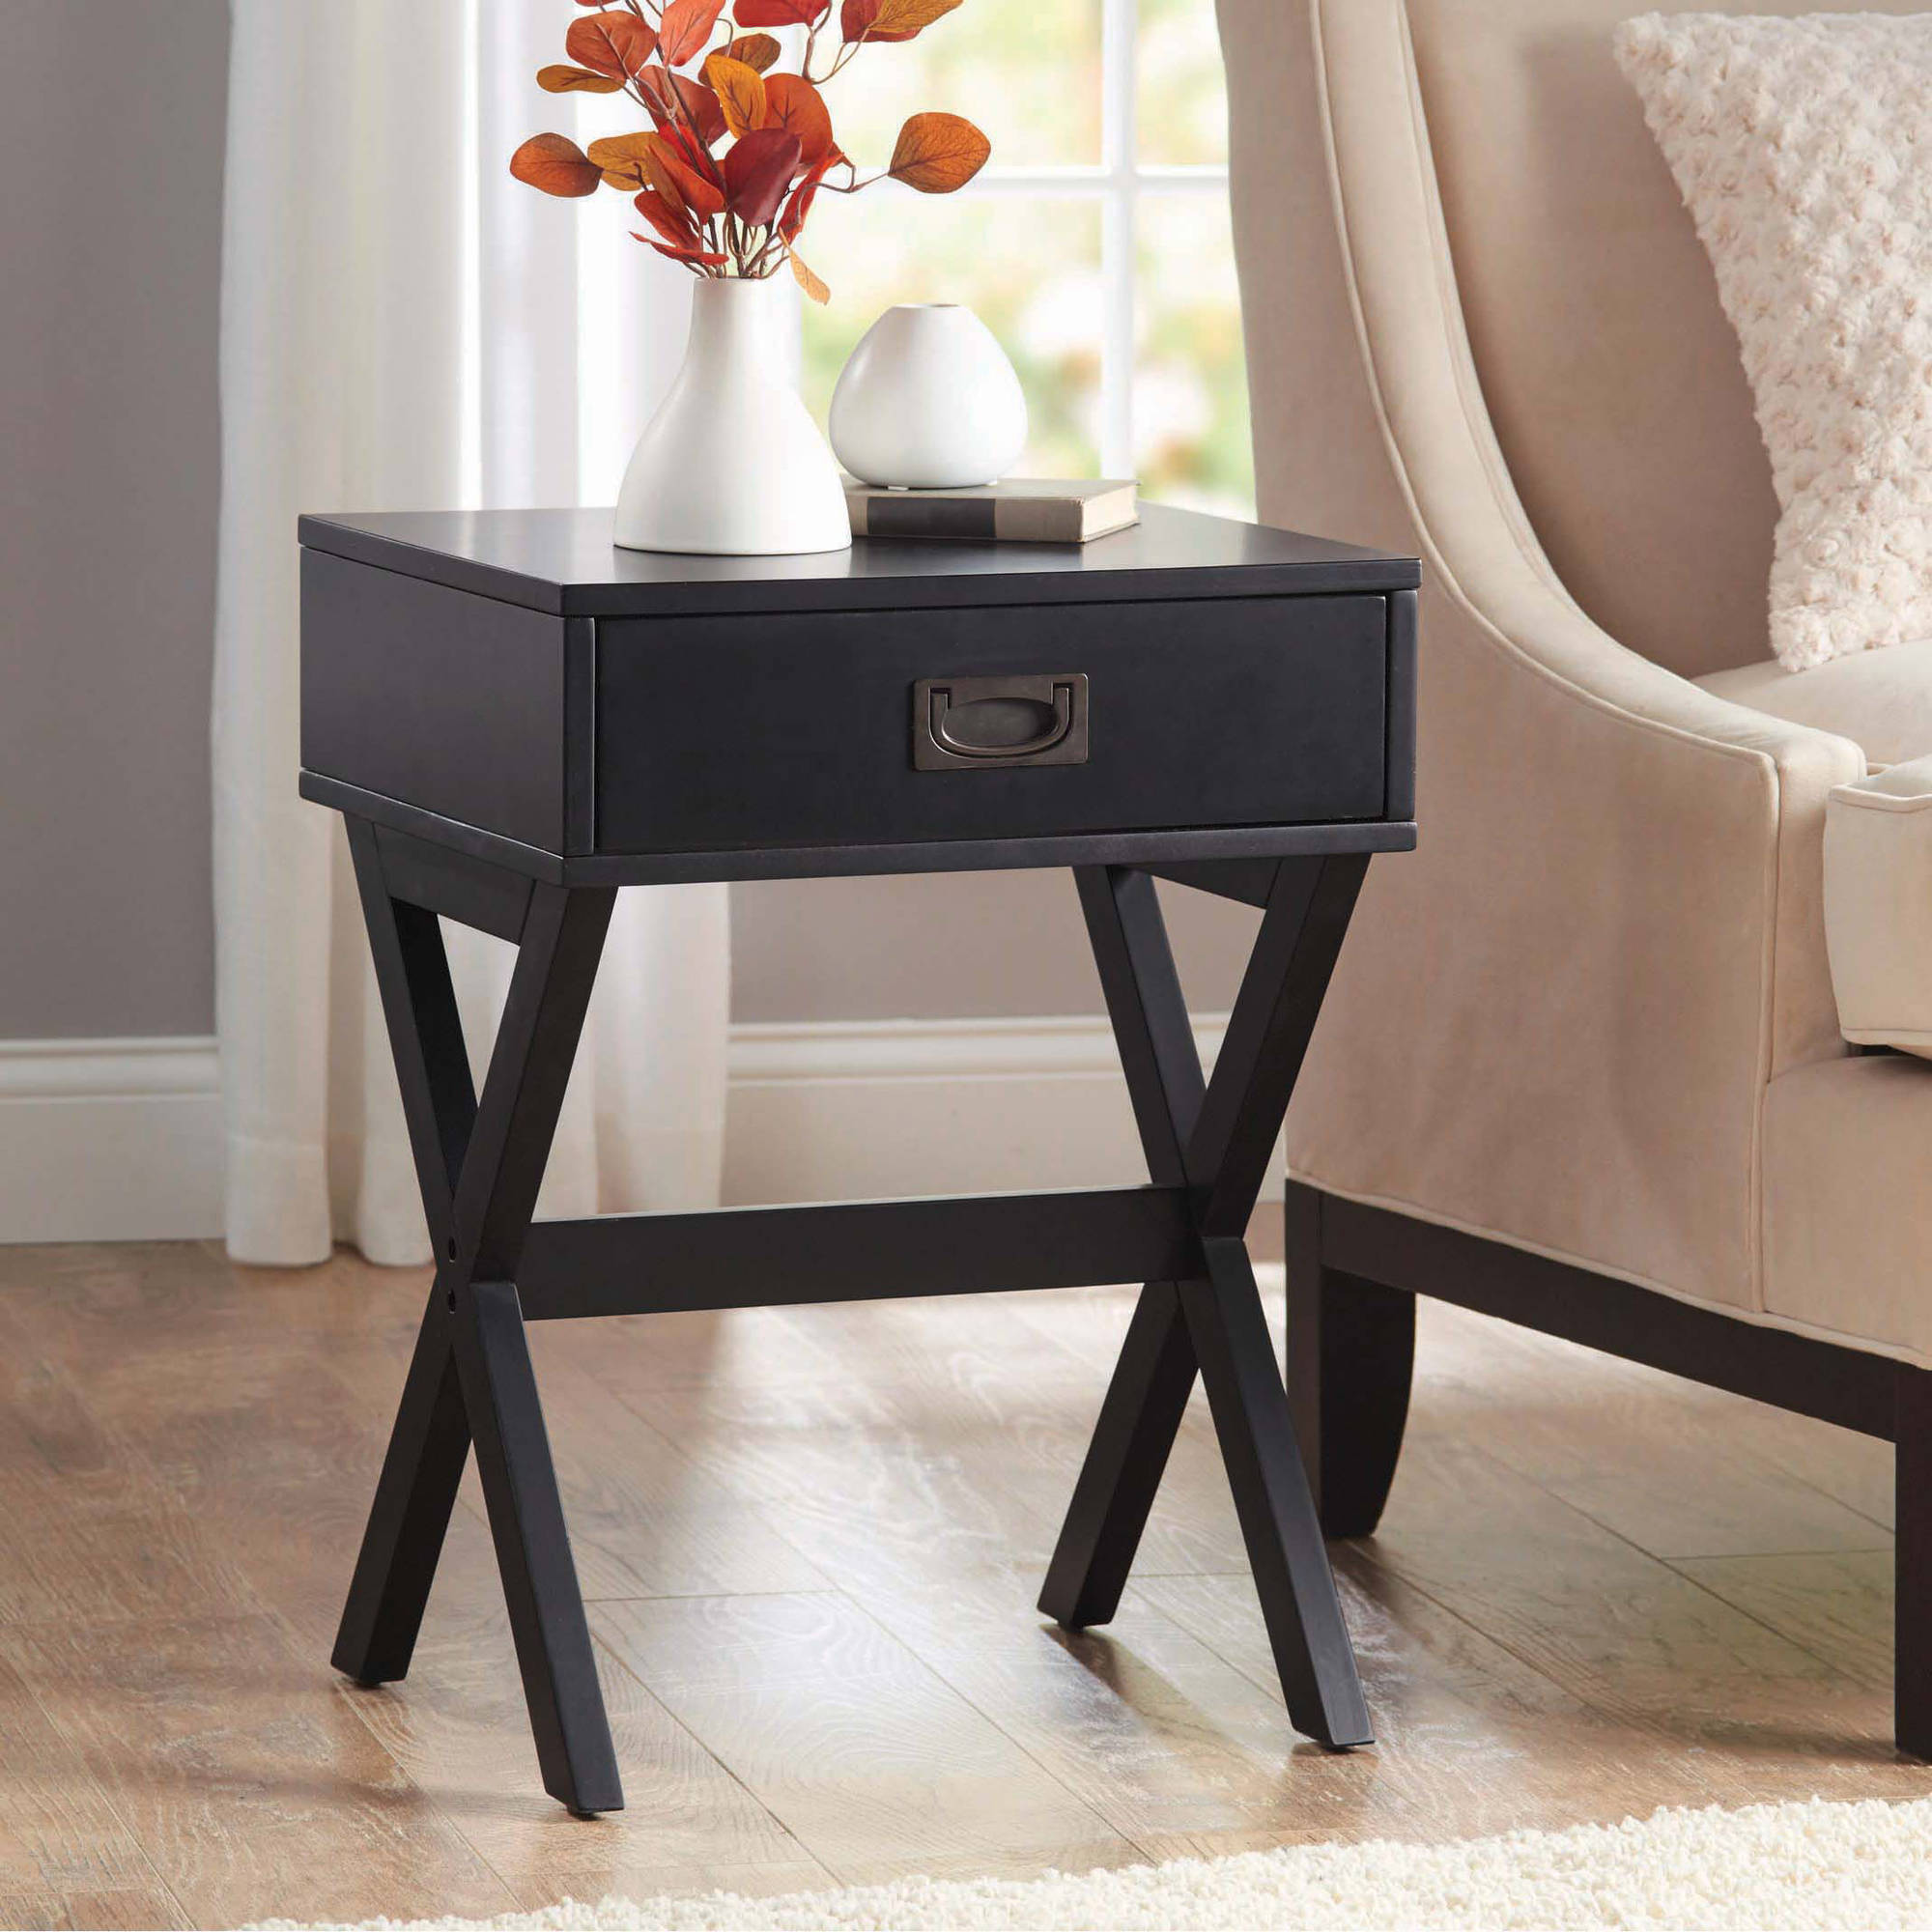 Better Homes & Gardens X-Leg Accent Table with Drawer, Multiple Colors - image 1 of 6